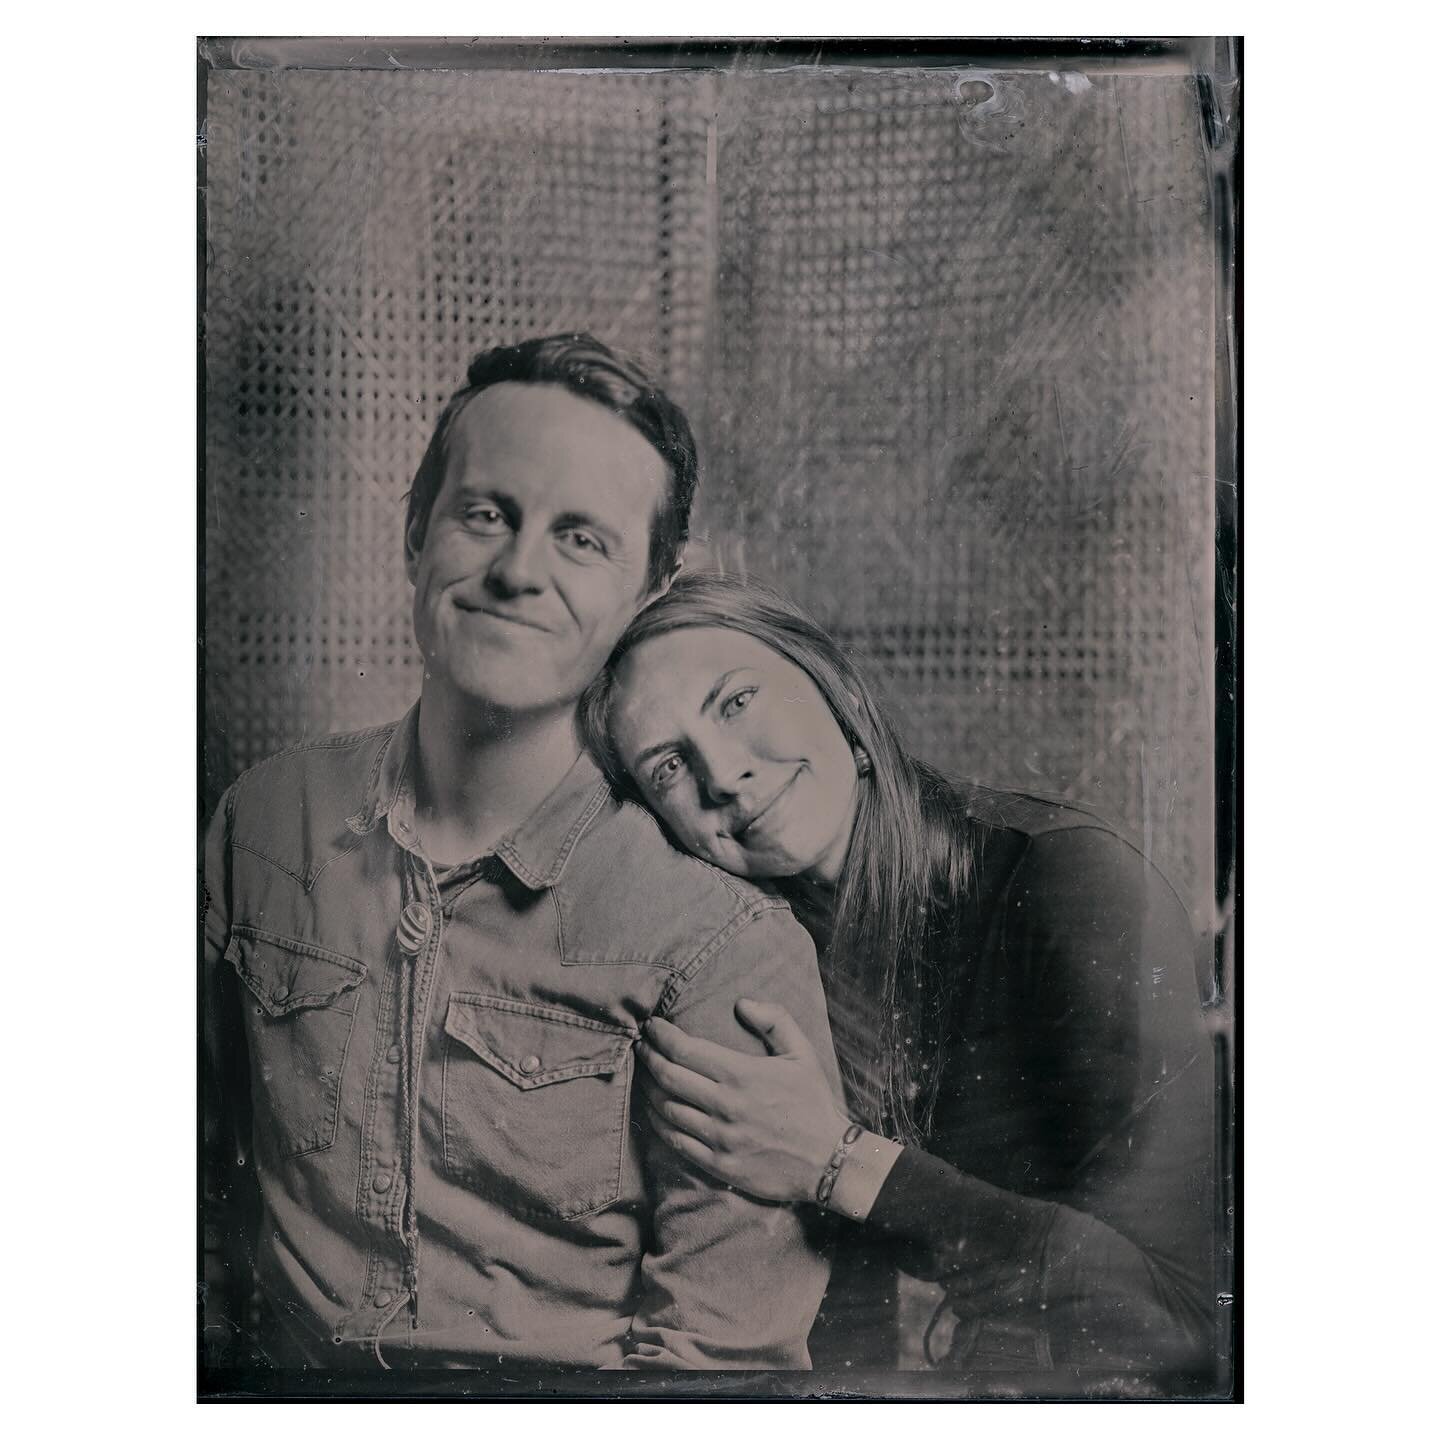 Dan + Maddie

First tintype clients! I&rsquo;m really enjoying this process and would love to take more portraits. Reach out if you&rsquo;re interested. 

Had an issue on the second plate but I&rsquo;m not mad about the result!

#tintypephotography #